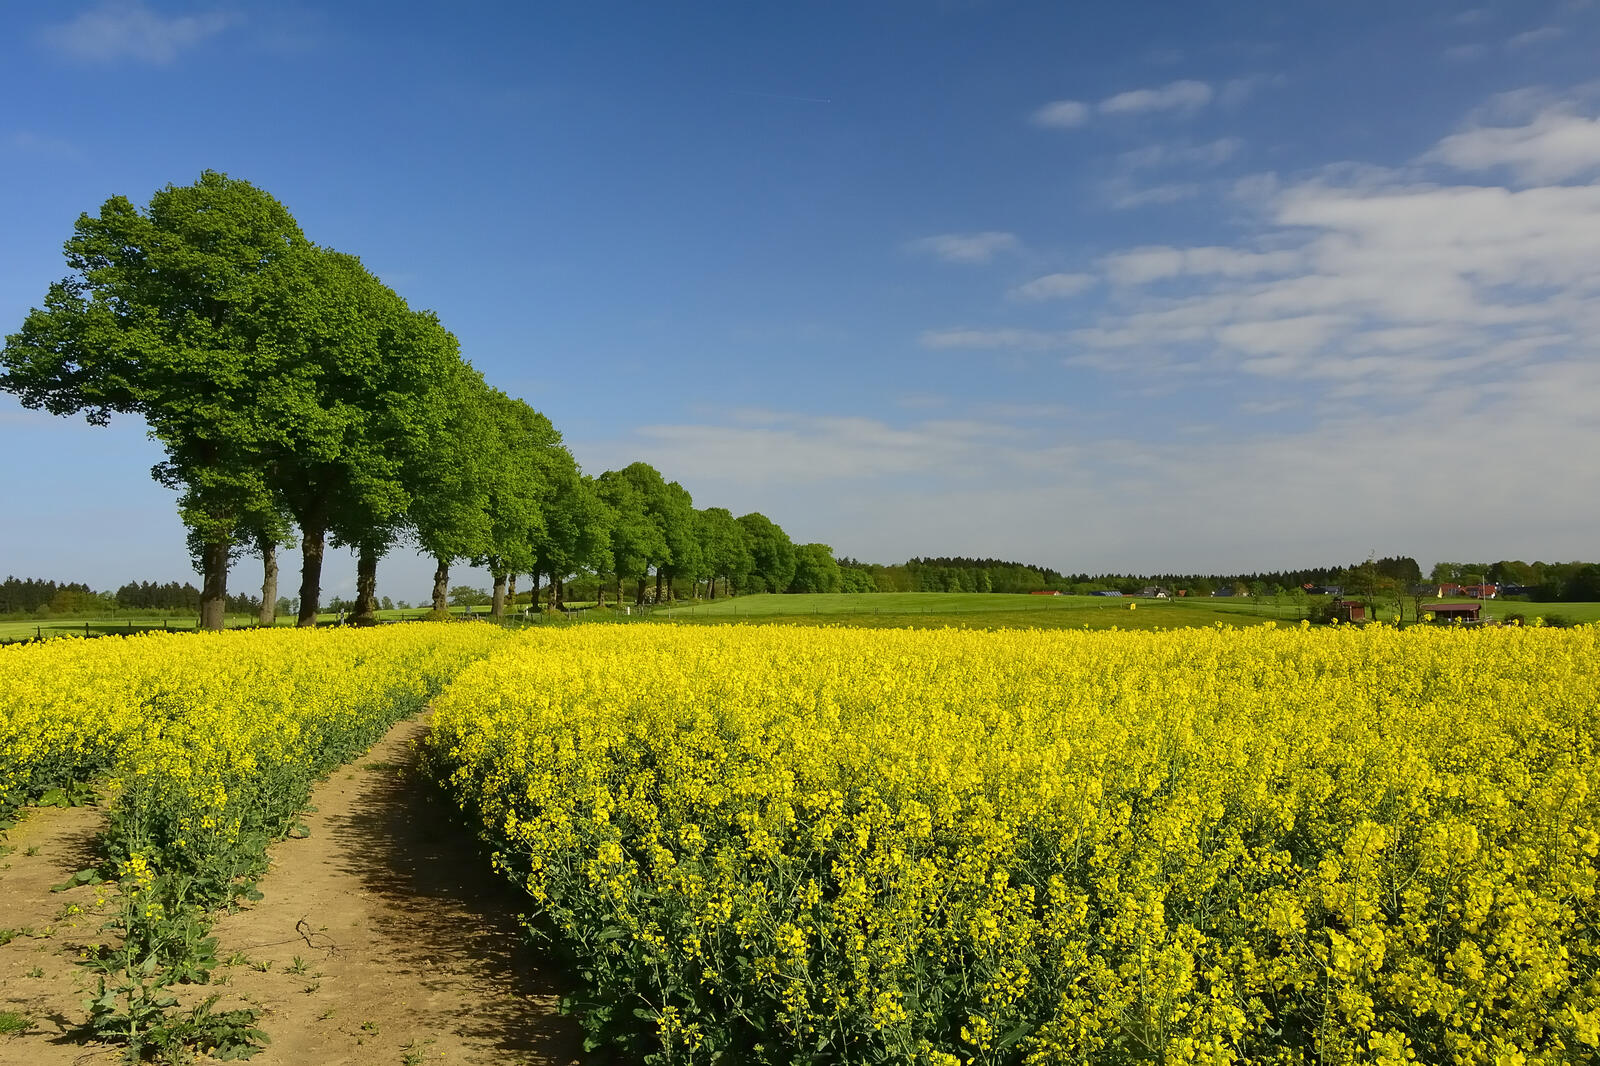 Wallpapers trees yellow field landscapes on the desktop